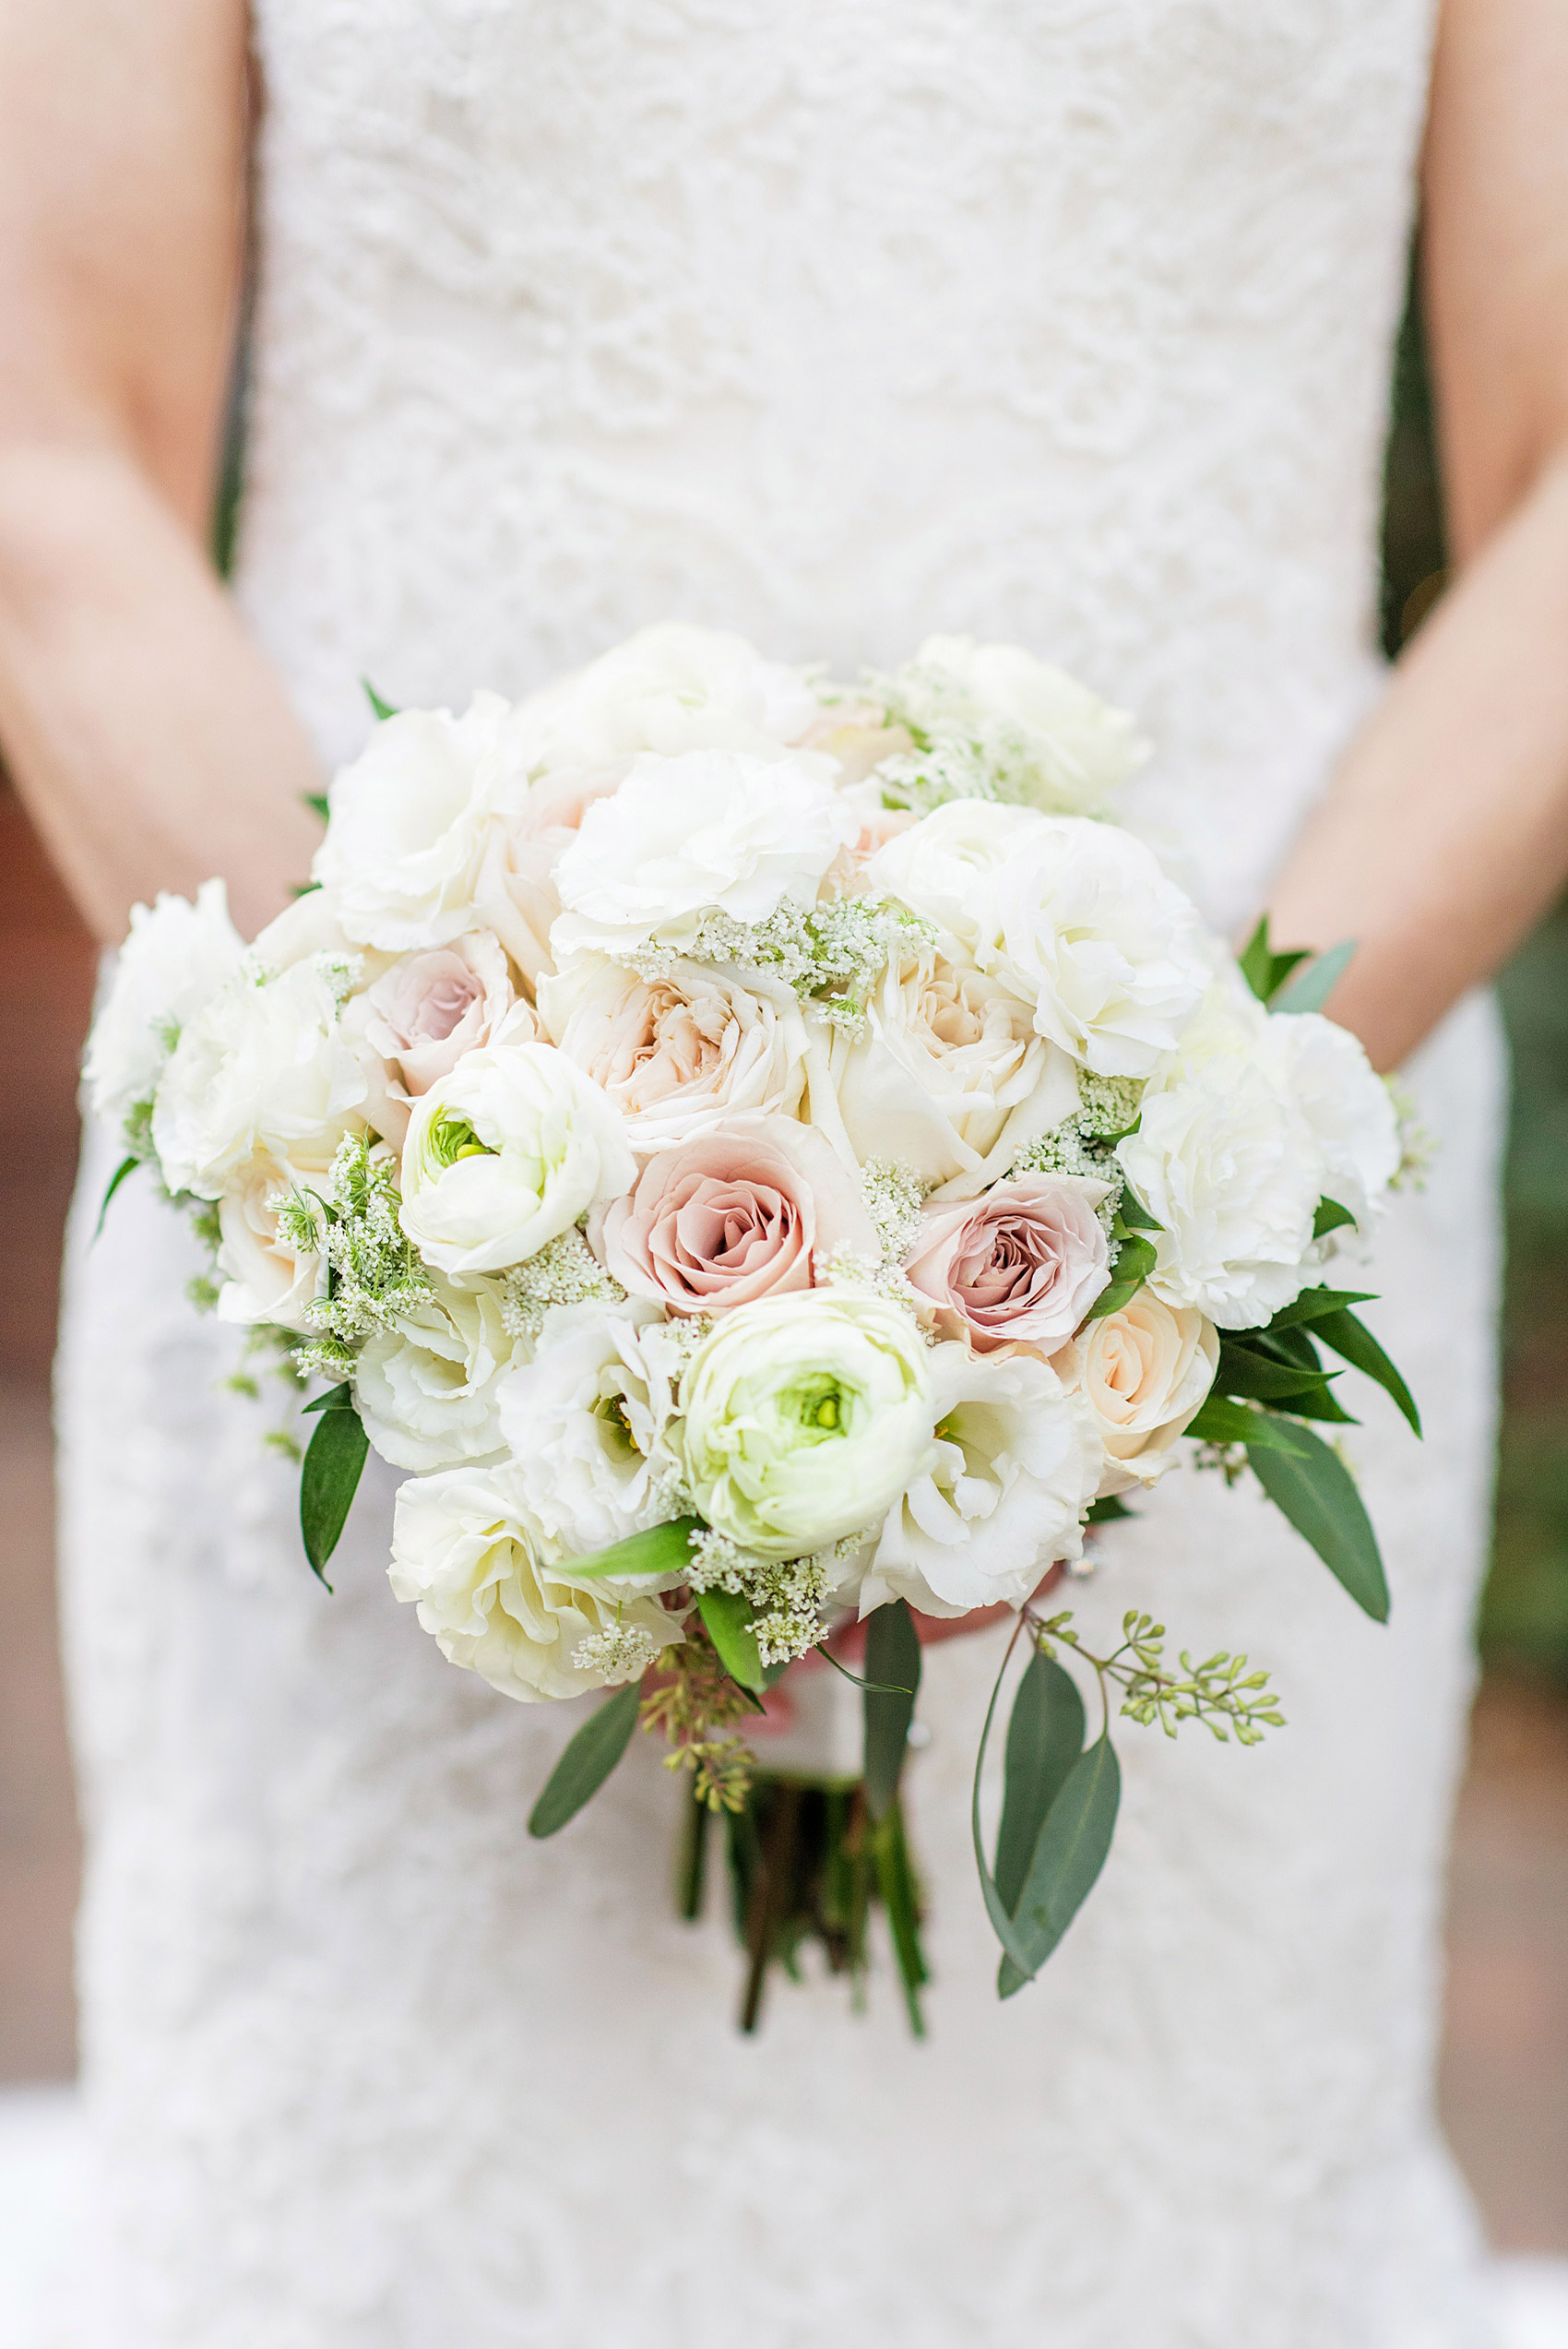 Photos by Mikkel Paige Photography of a Central Park Wedding ceremony and reception at the Loeb Boathouse venue with a romantic theme. Detail picture of the bride's ranunculus, rose and Queen Anne's Lace bouquet for her winter wedding. Click through for more images from her day! #CentralParkWedding